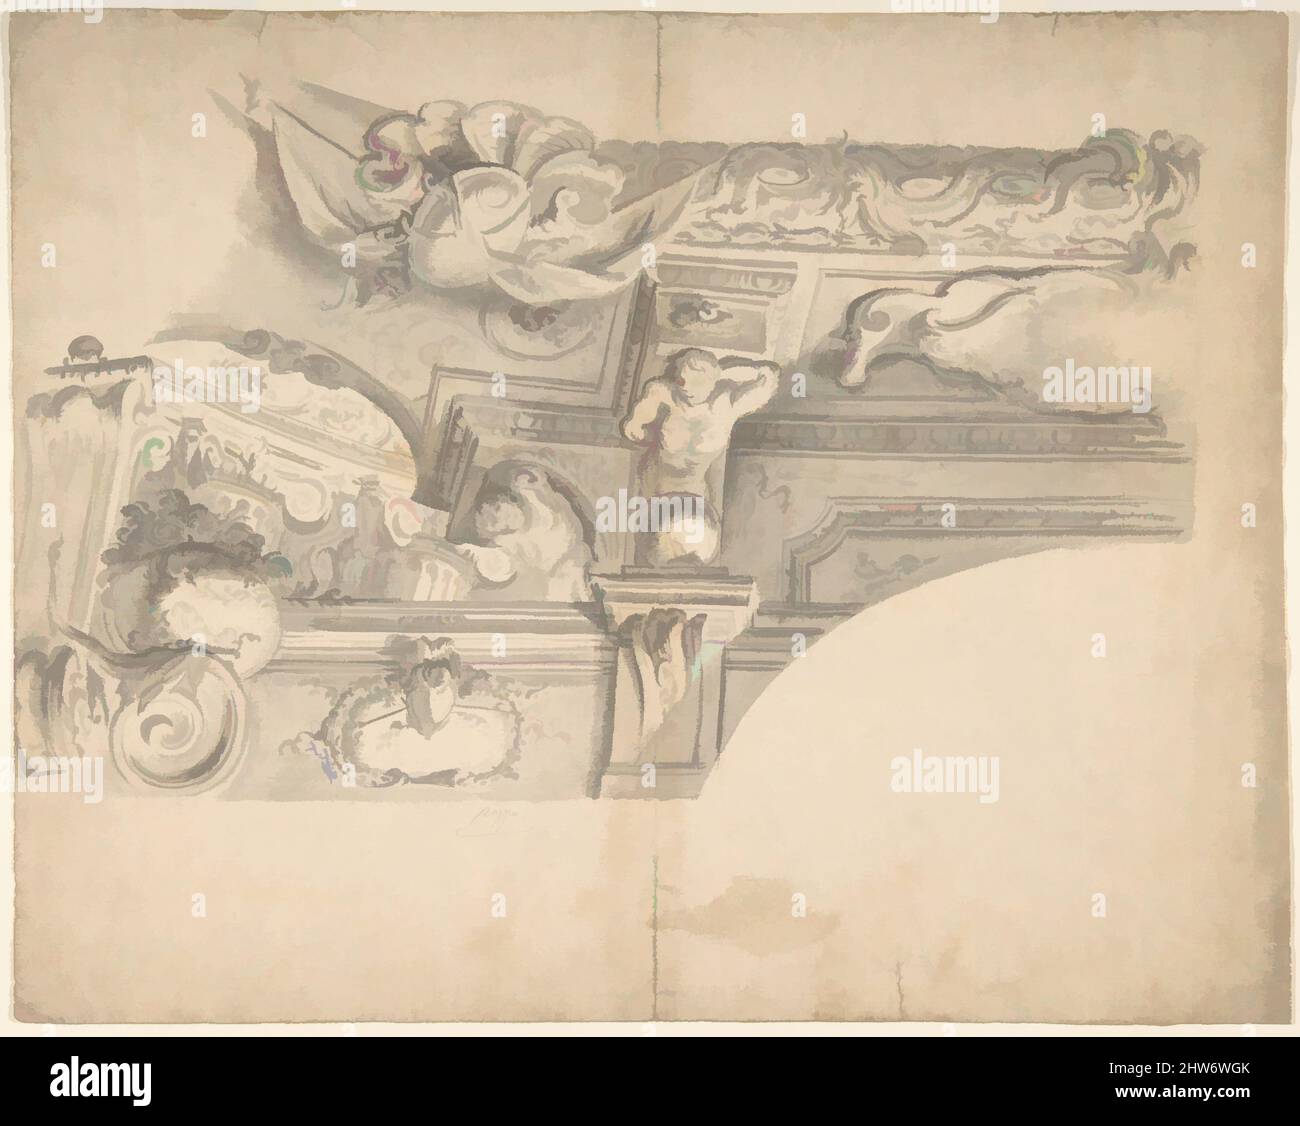 Art inspired by Design for the Decoration of a Cornice, 18th century, Ink and gray wash, 11-5/8 x 19-1/4 in, Anonymous, Italian, 18th century, Classic works modernized by Artotop with a splash of modernity. Shapes, color and value, eye-catching visual impact on art. Emotions through freedom of artworks in a contemporary way. A timeless message pursuing a wildly creative new direction. Artists turning to the digital medium and creating the Artotop NFT Stock Photo